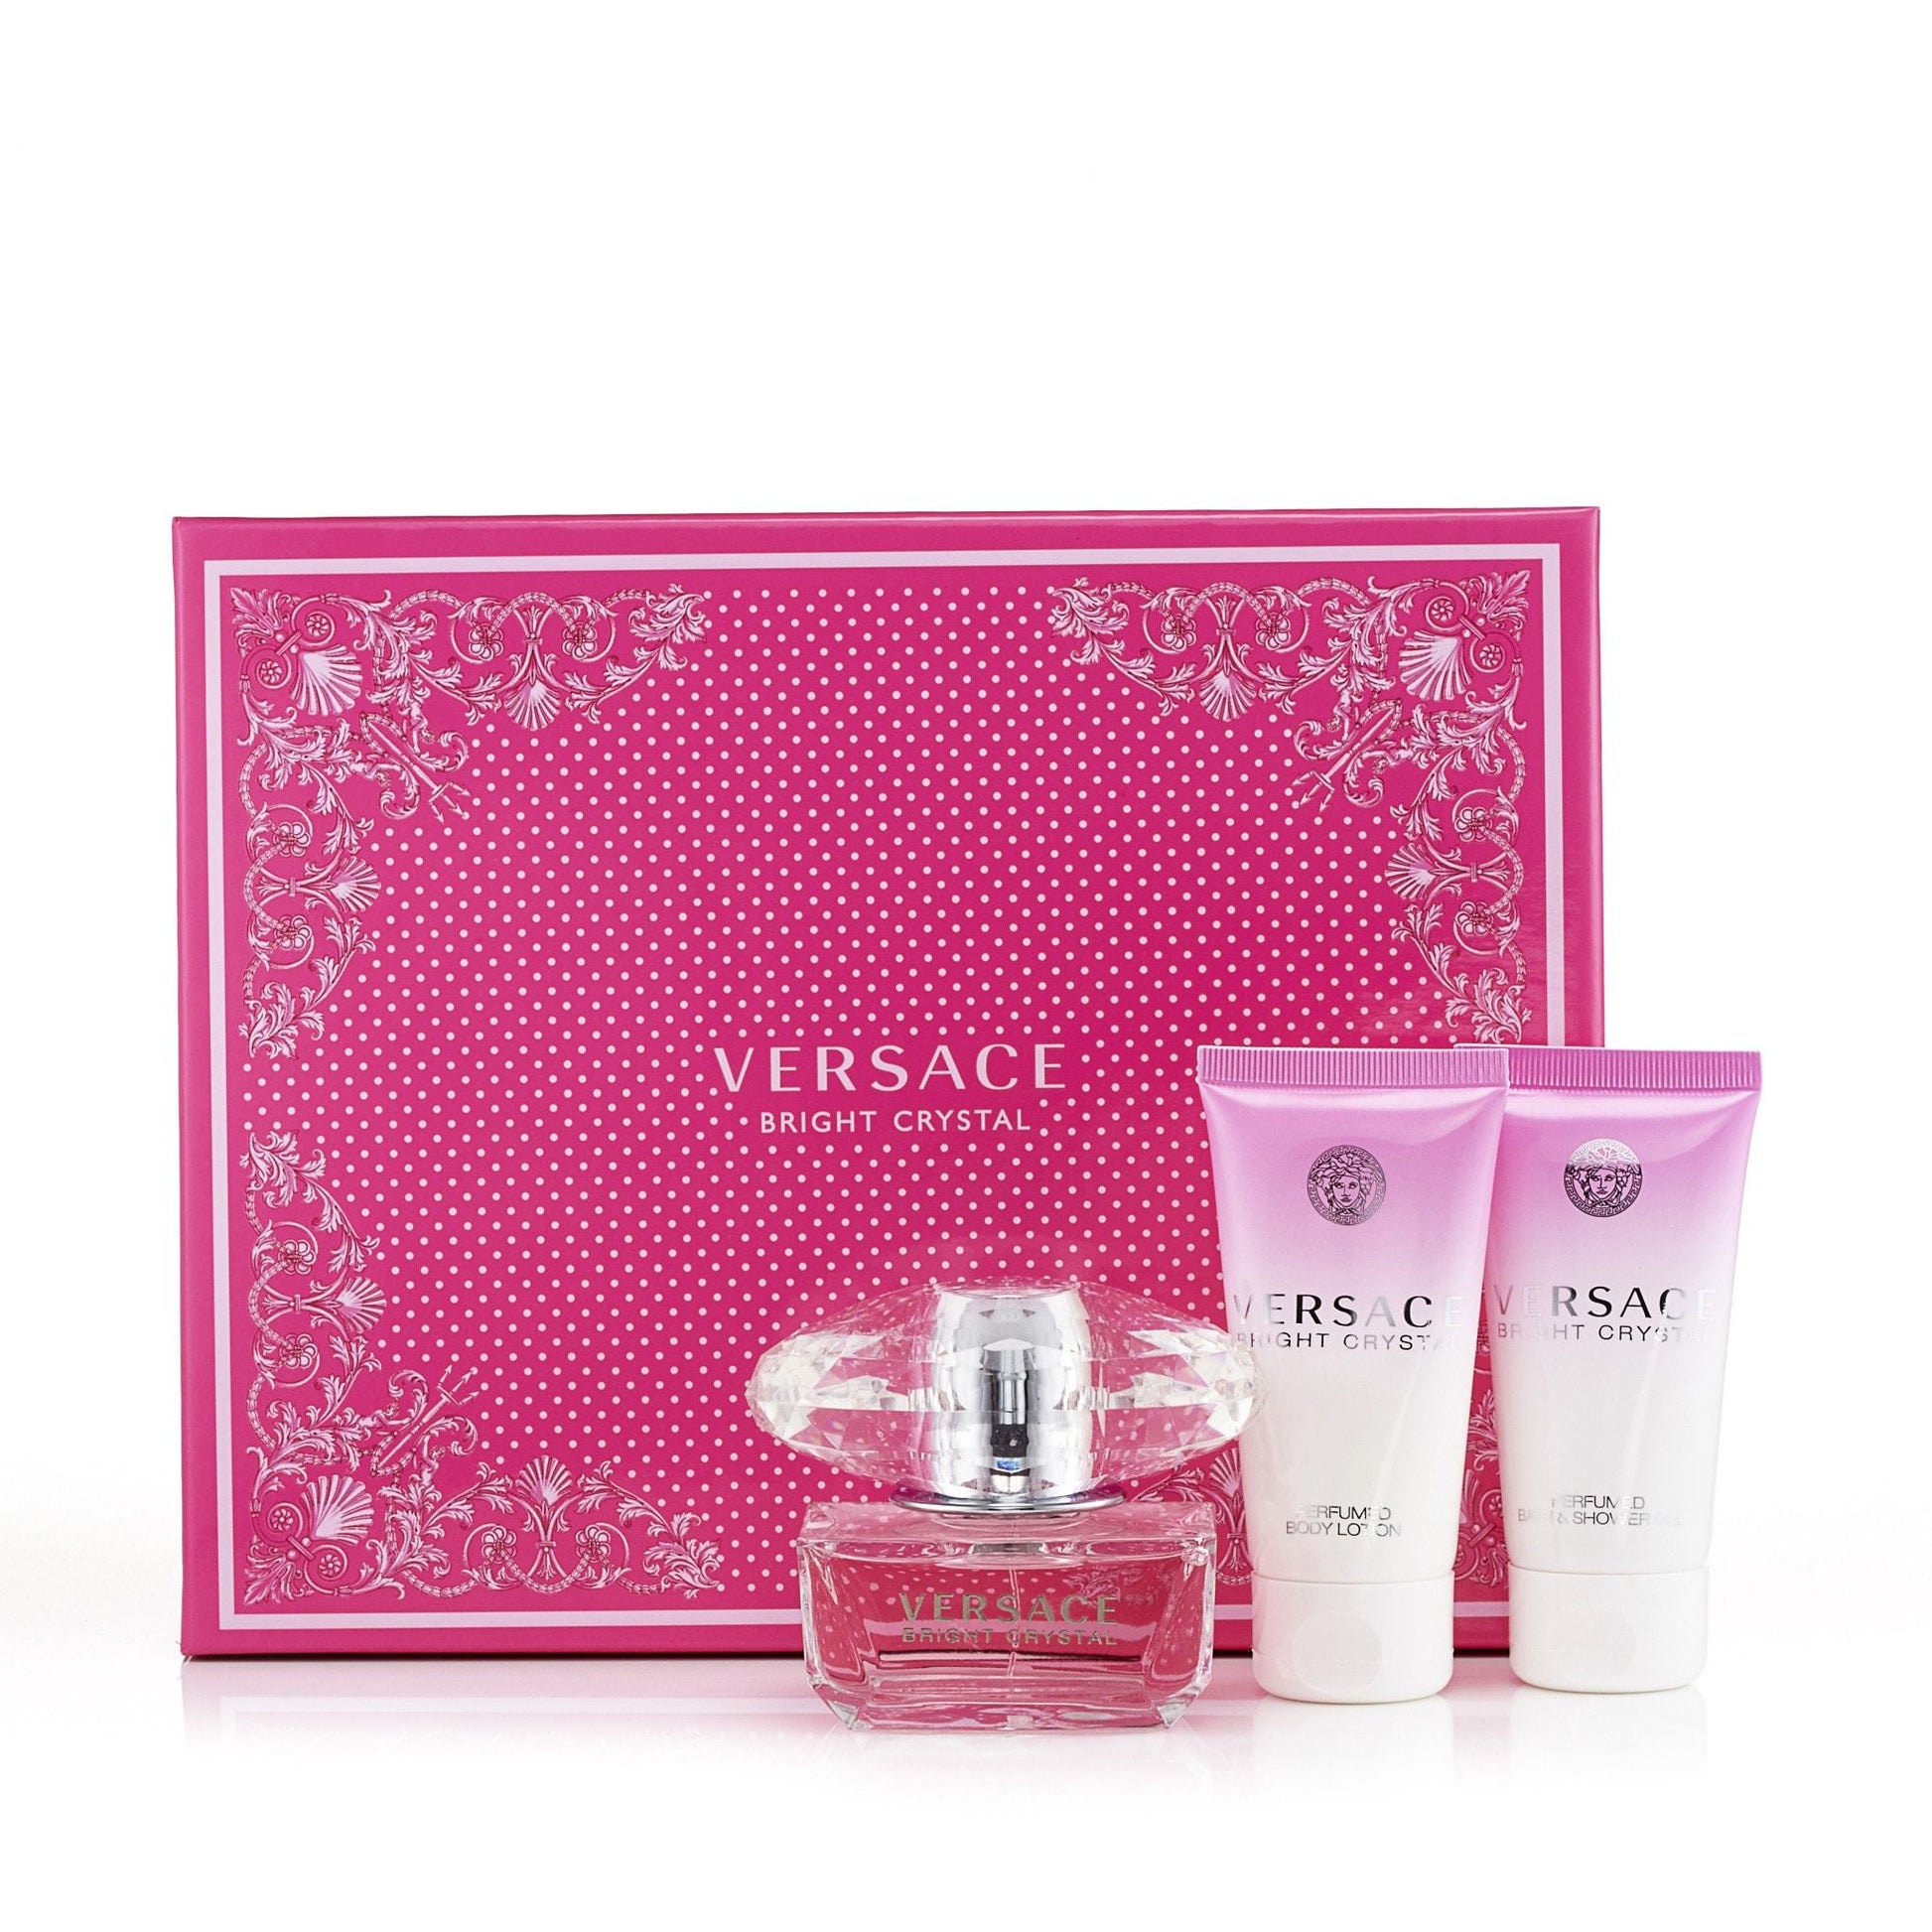 Bright Crystal Gift Set Eau de Toilette Body Lotion and Shower Gel for Women by Versace, Product image 2